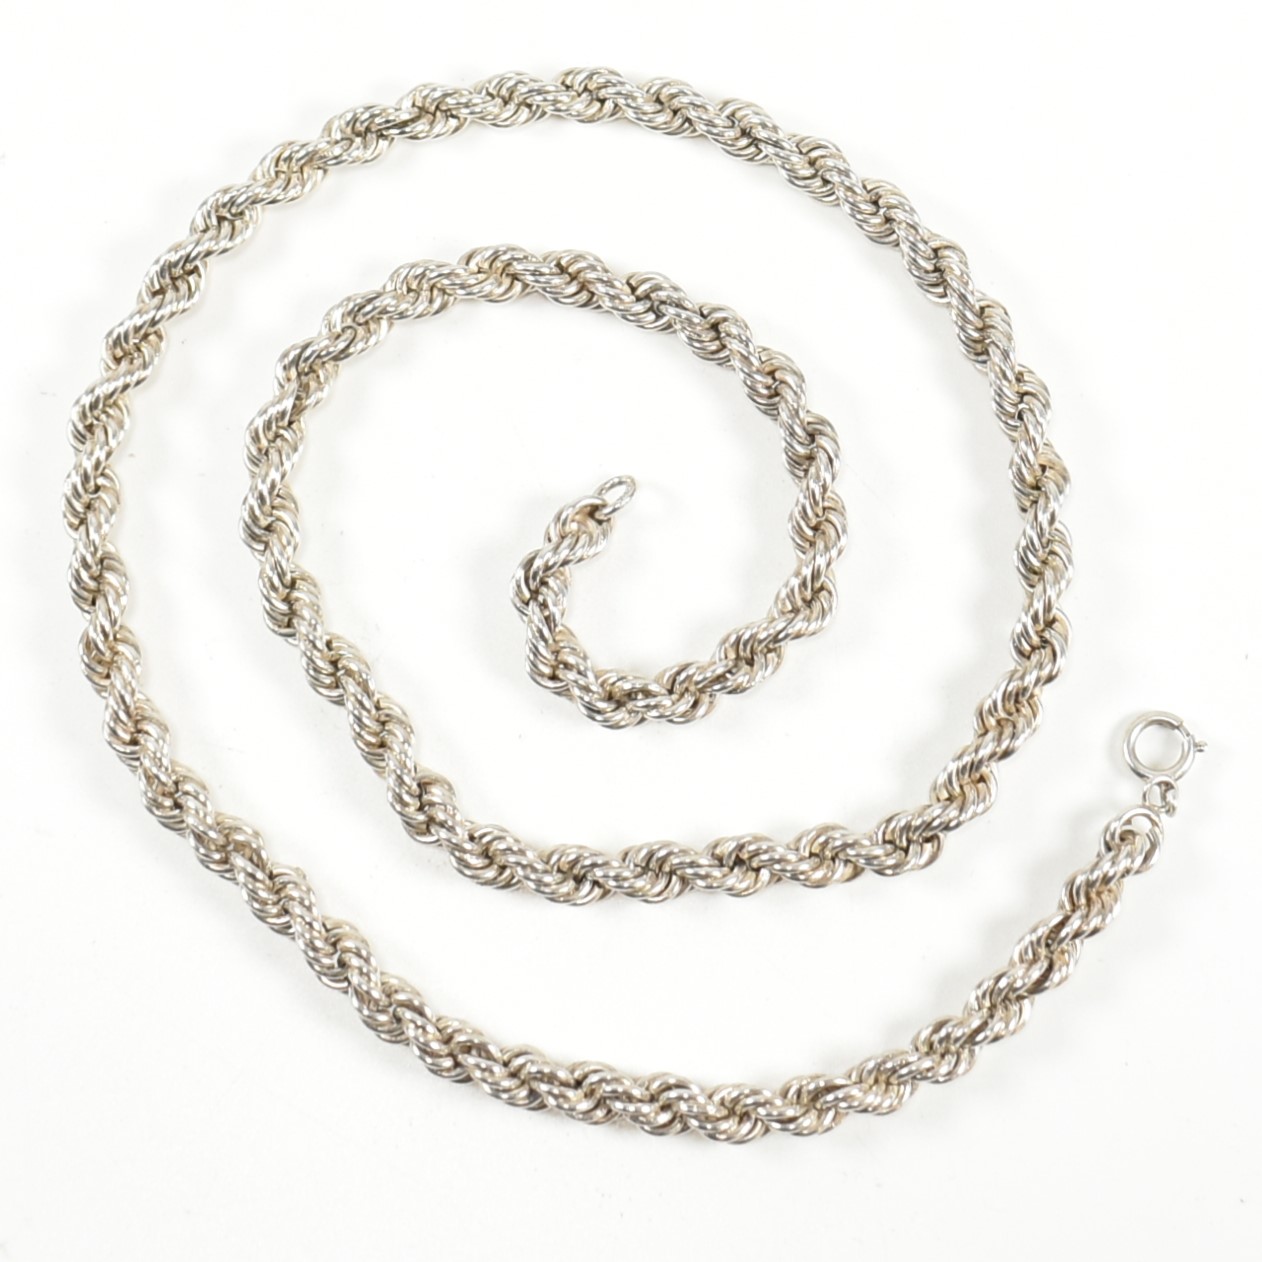 SILVER TWISTED ROPE CHAIN NECKLACE - Image 3 of 4